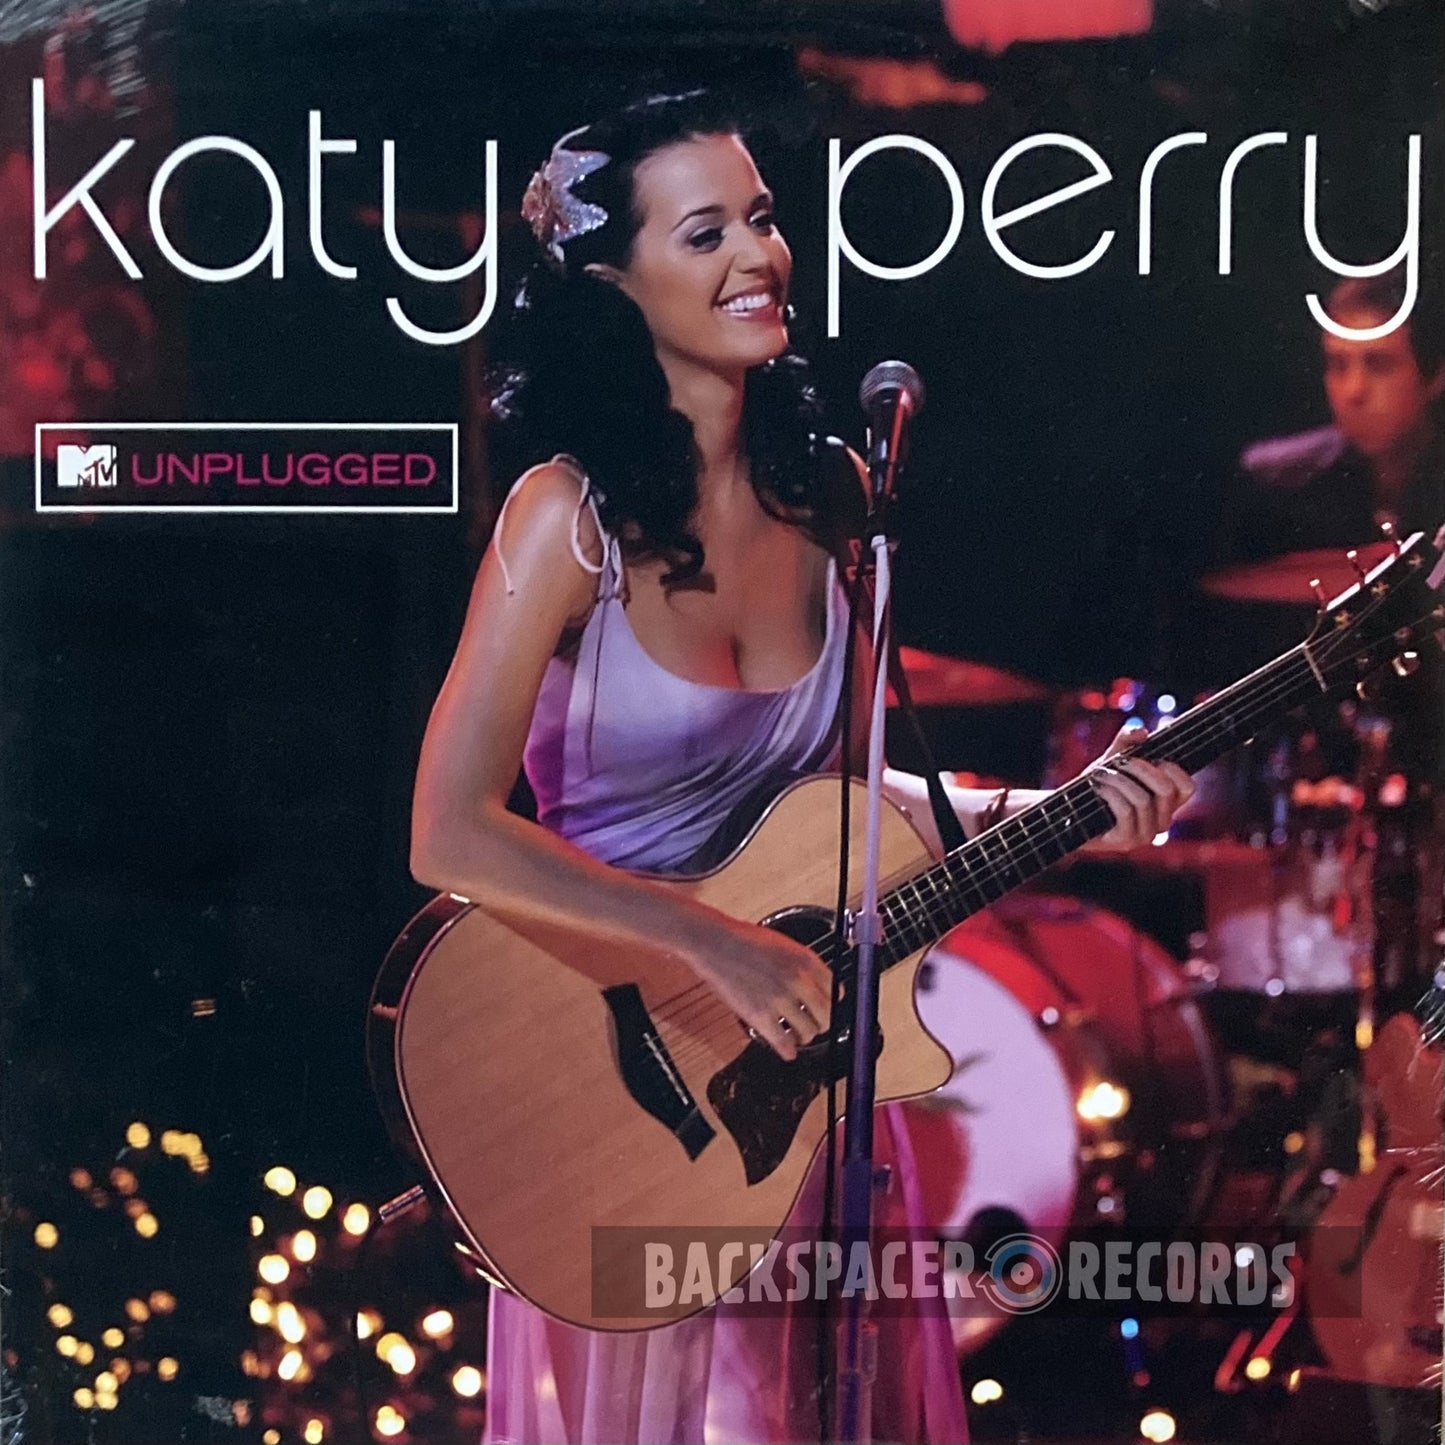 Katy Perry – MTV Unplugged (Limited Edition) LP (Sealed)